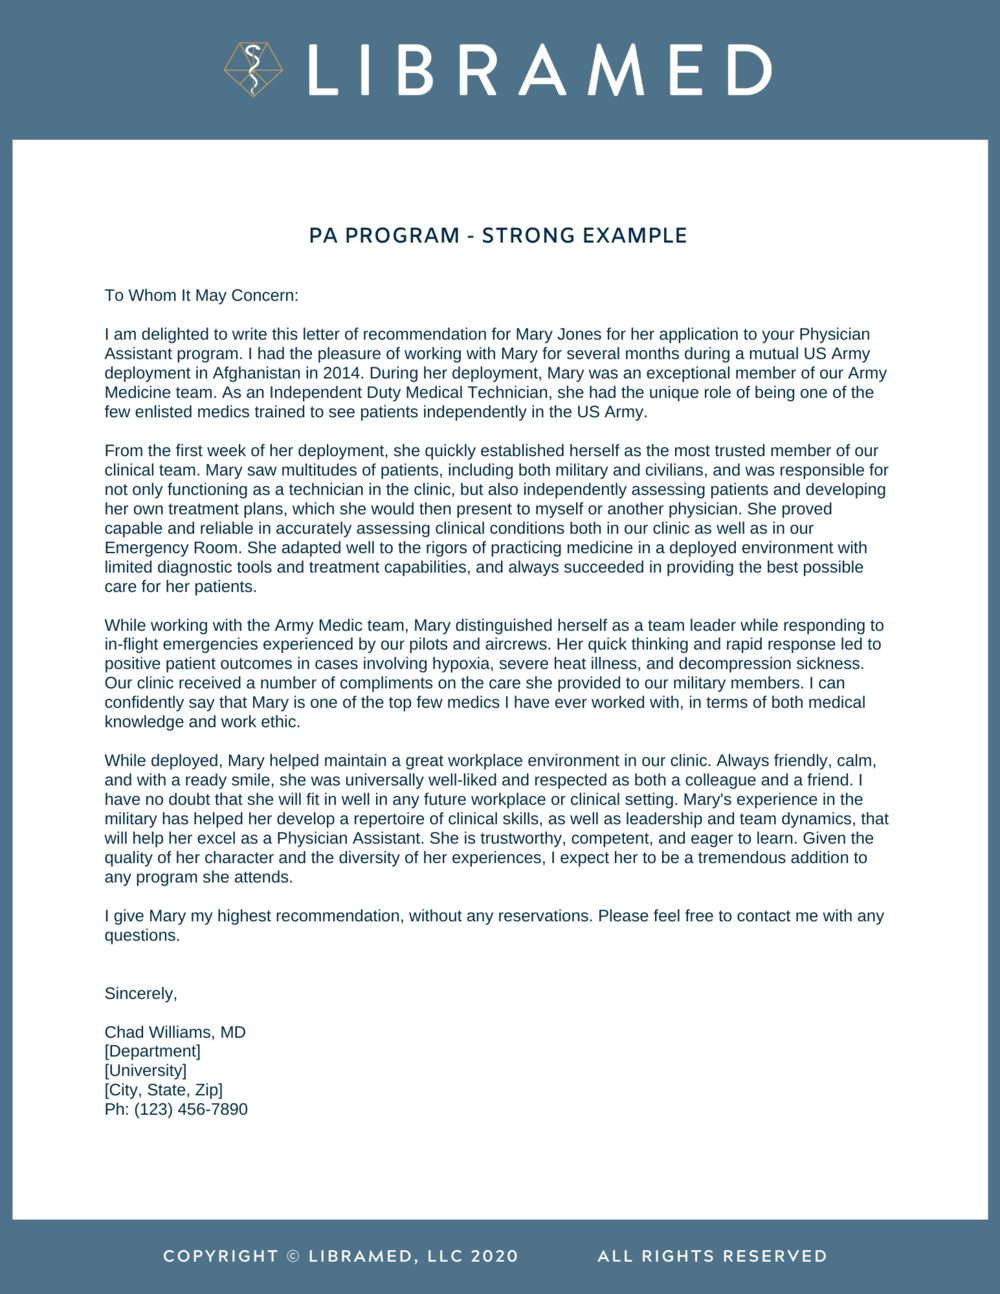 PA Position, Strong Letter of Recommendation — LIBRAMED